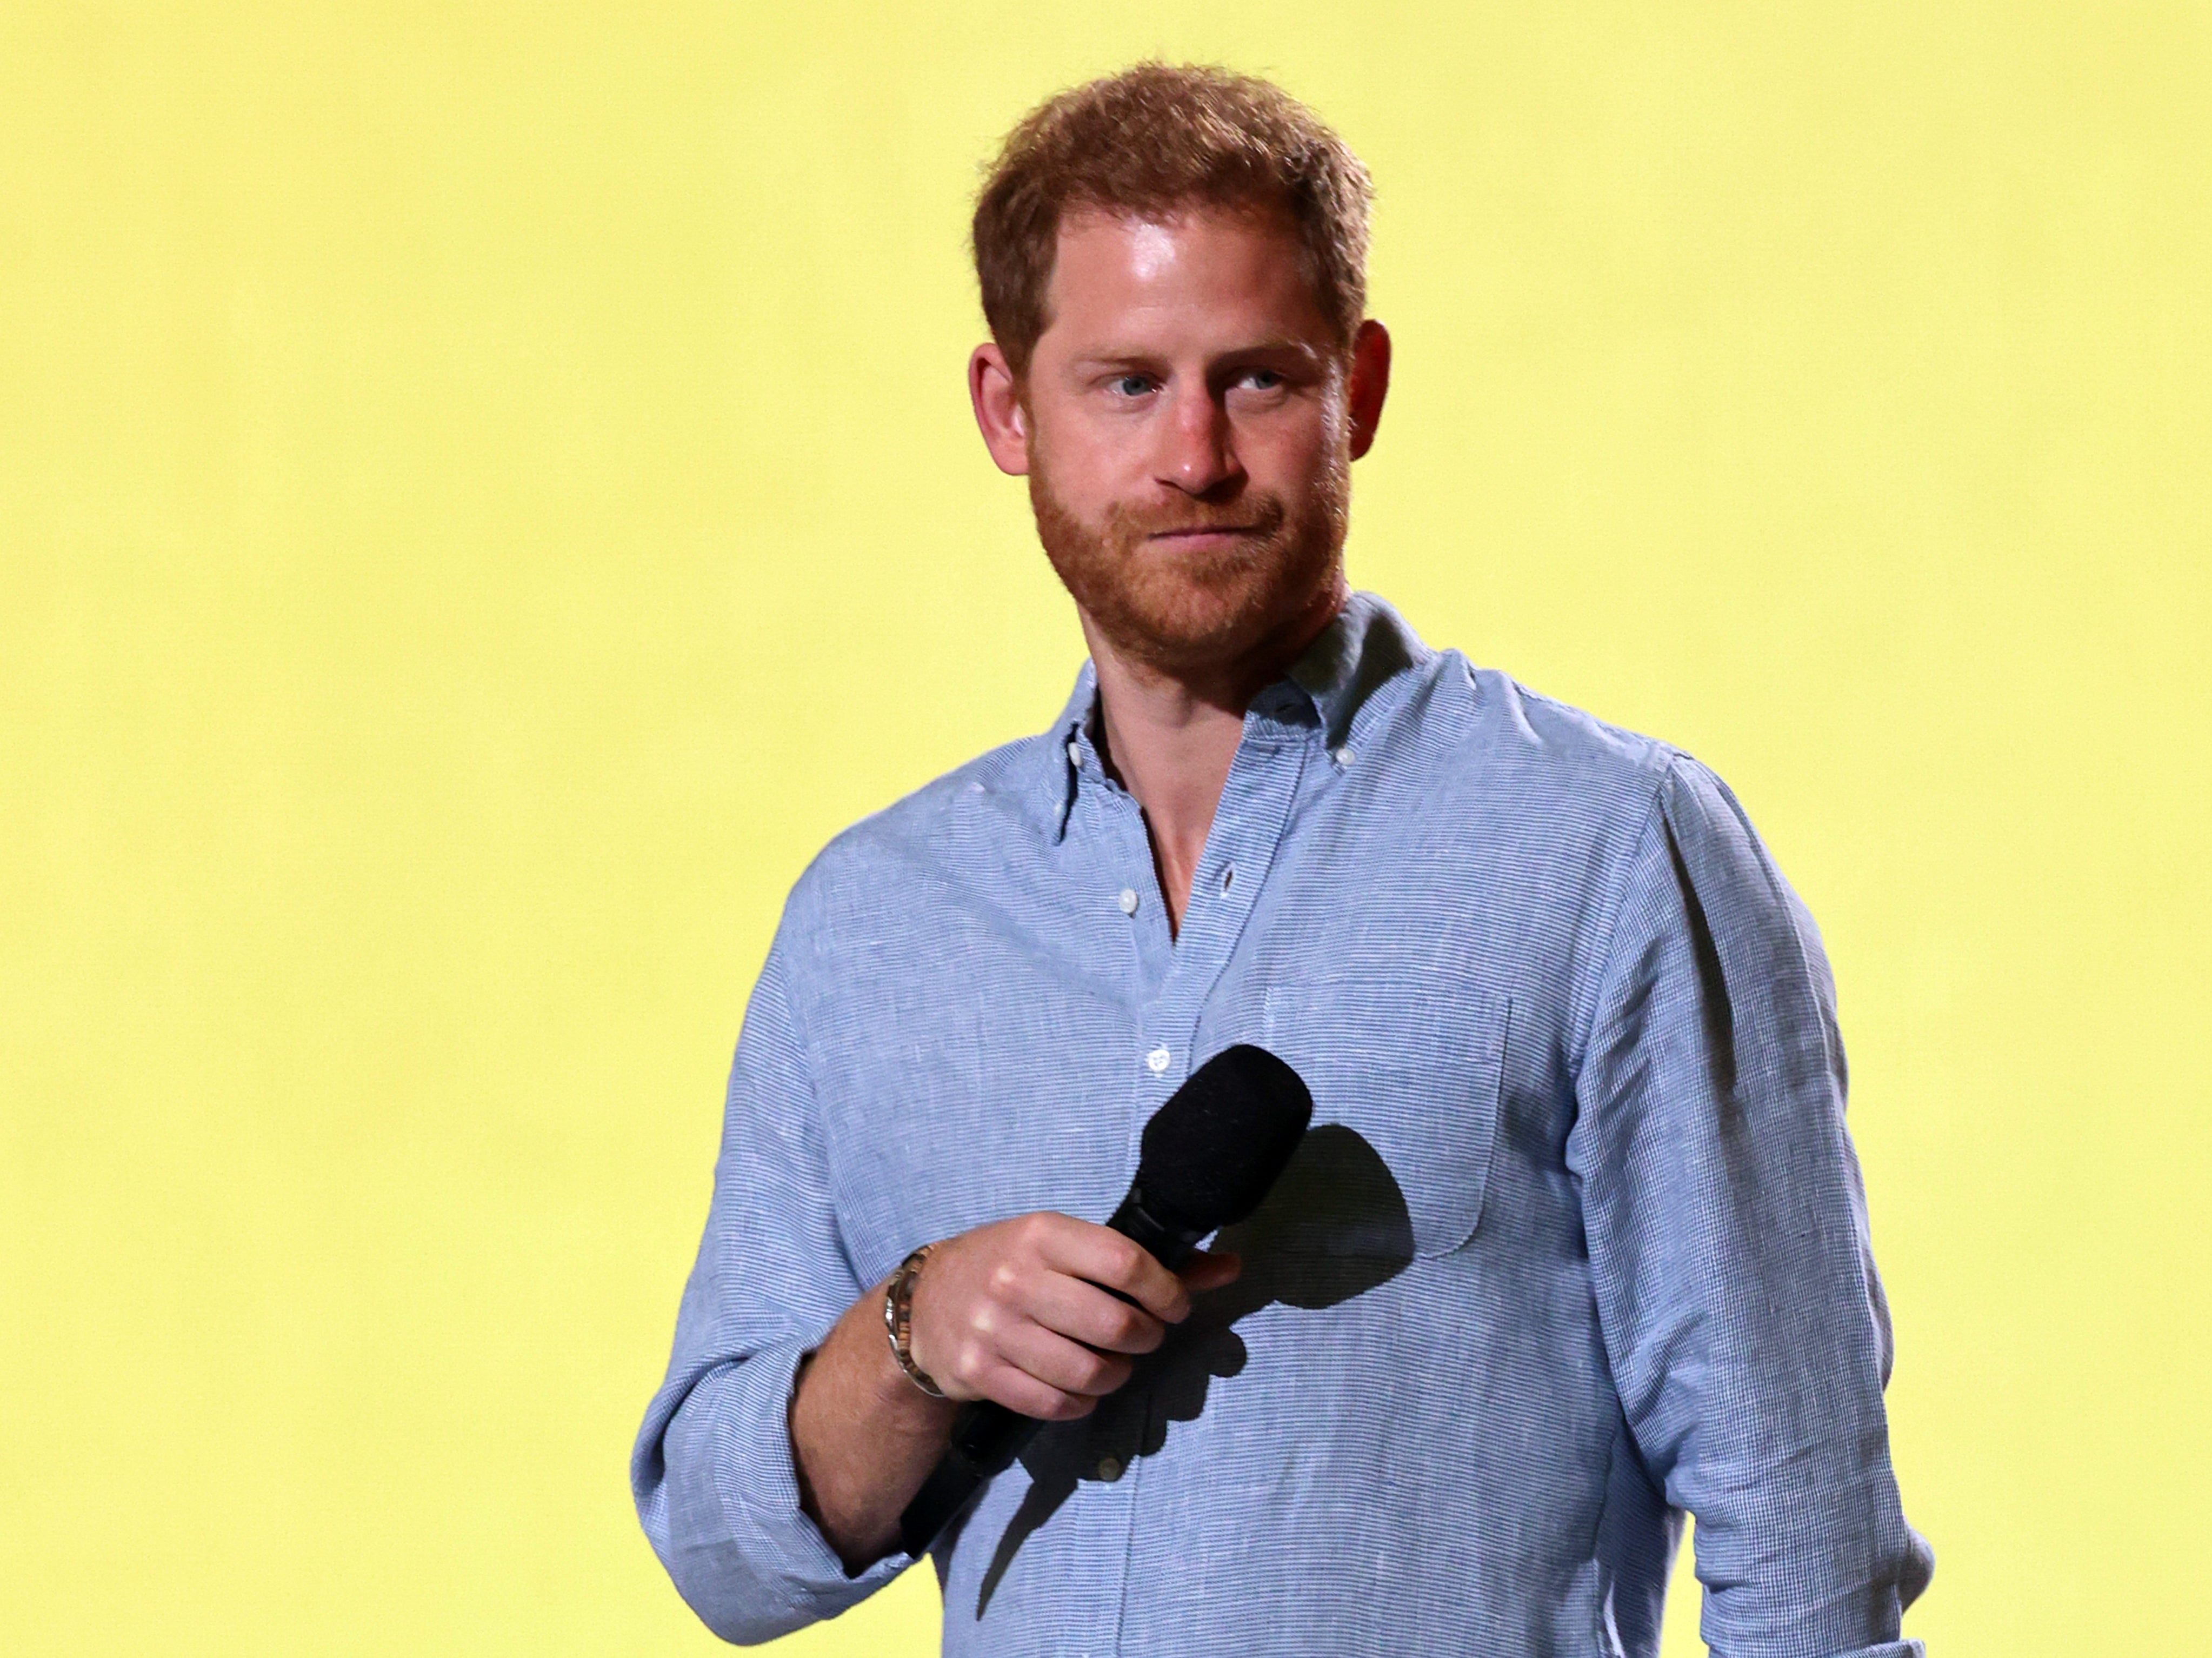 Prince Harry during the Global Citizen Vax Live concert in May